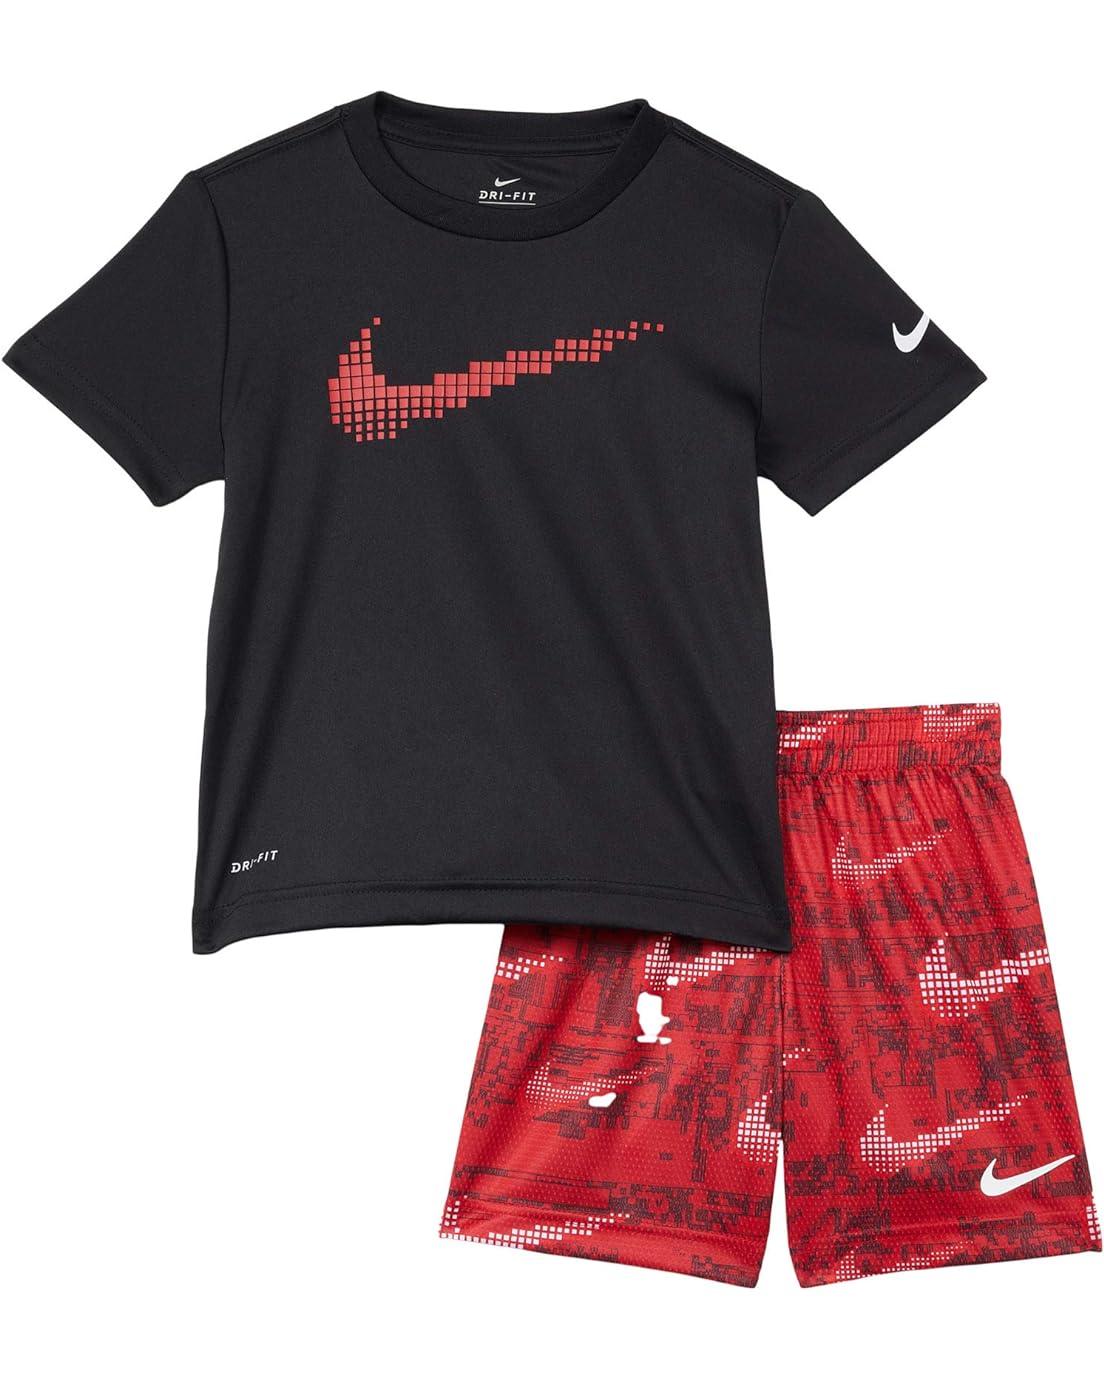 Nike Kids Dri-FIT Dominate Graphic T-Shirt and Shorts Two-Piece Set (Toddler)